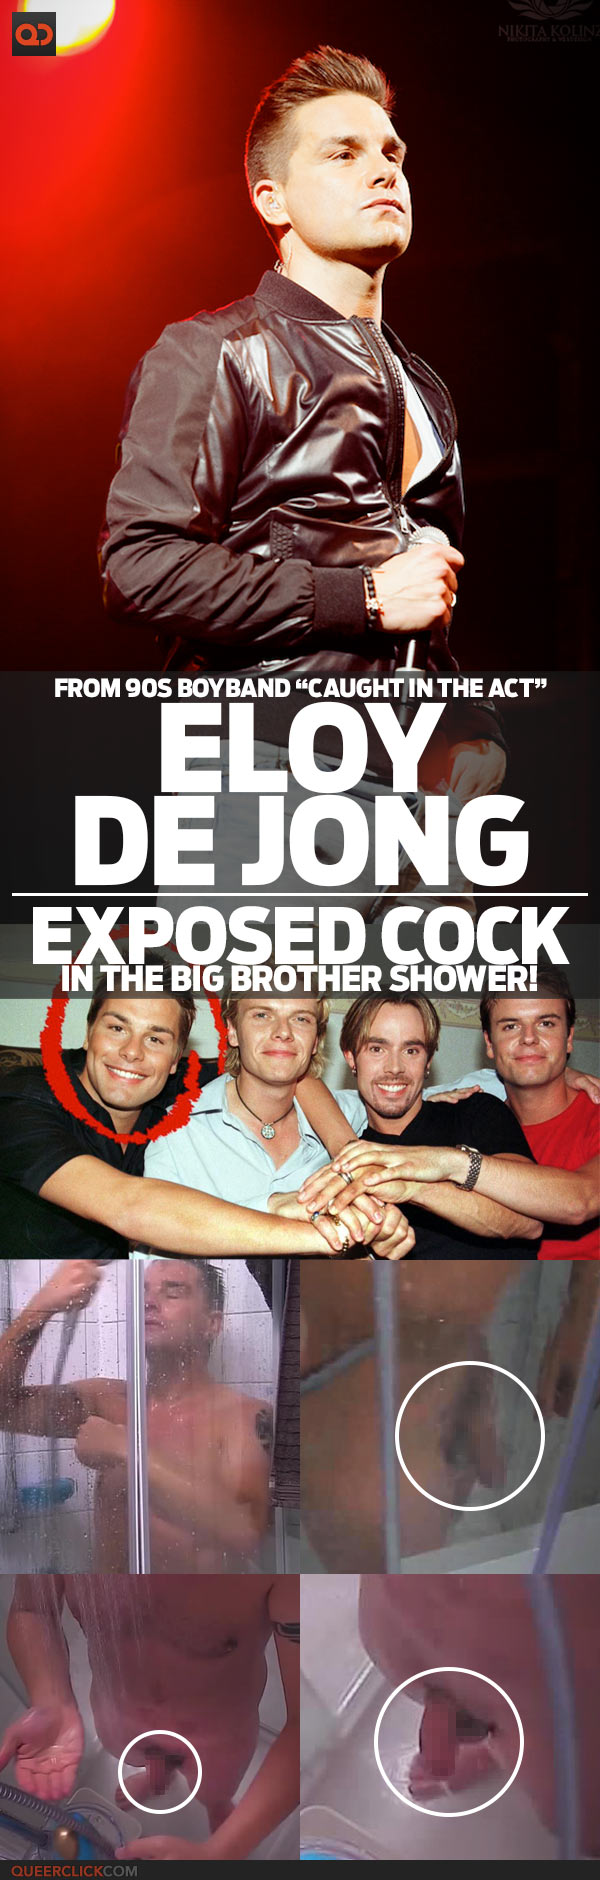 Eloy De Jong, From 90s BoyBand “Caught In The Act”, Exposed Cock In The Big Brother Shower!